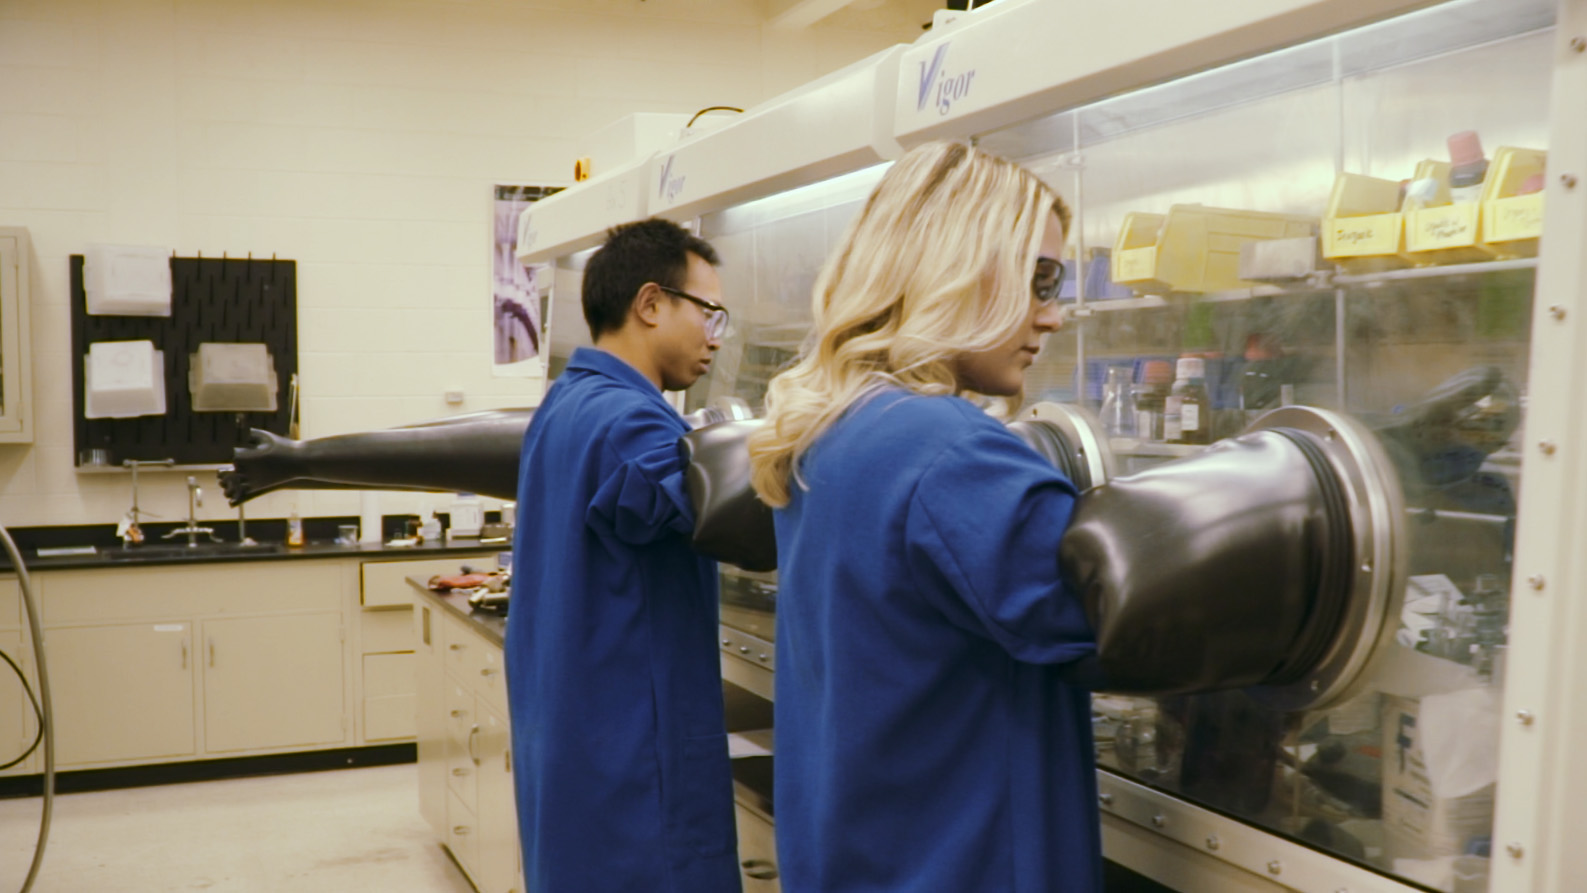 Two researchers putting their arms into rubber gloves to work in a contained environment